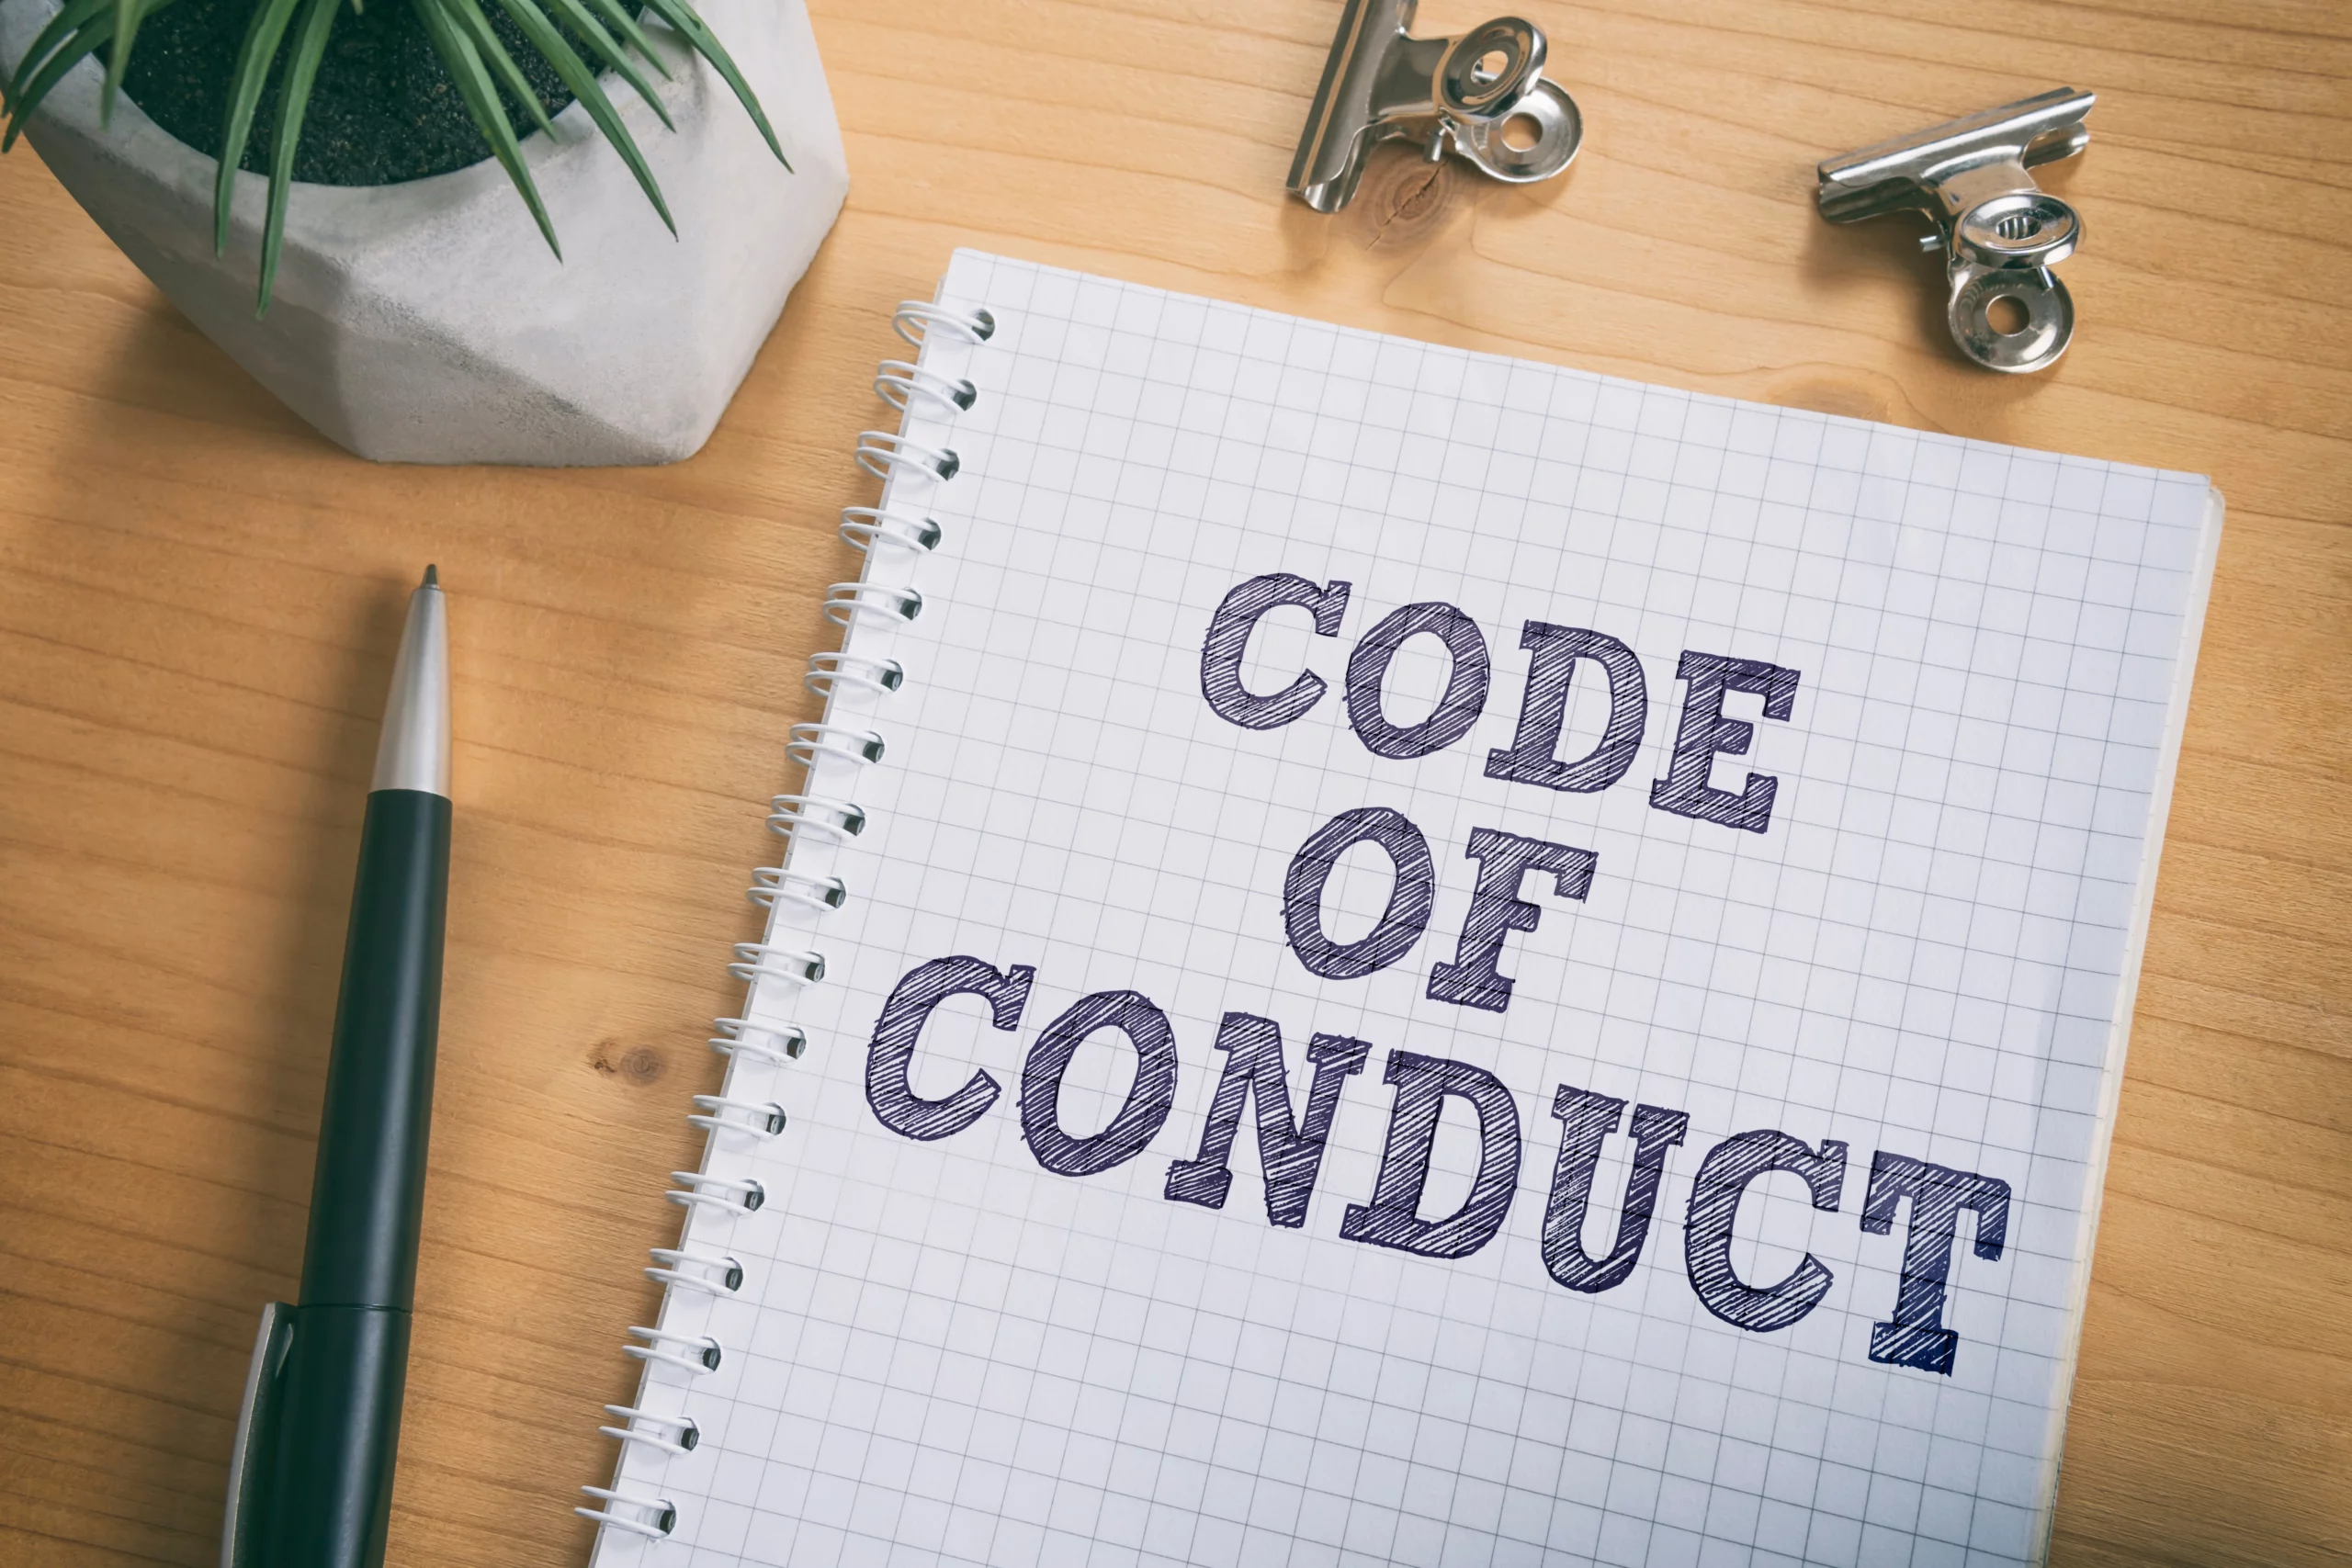 A businesses code of conduct 